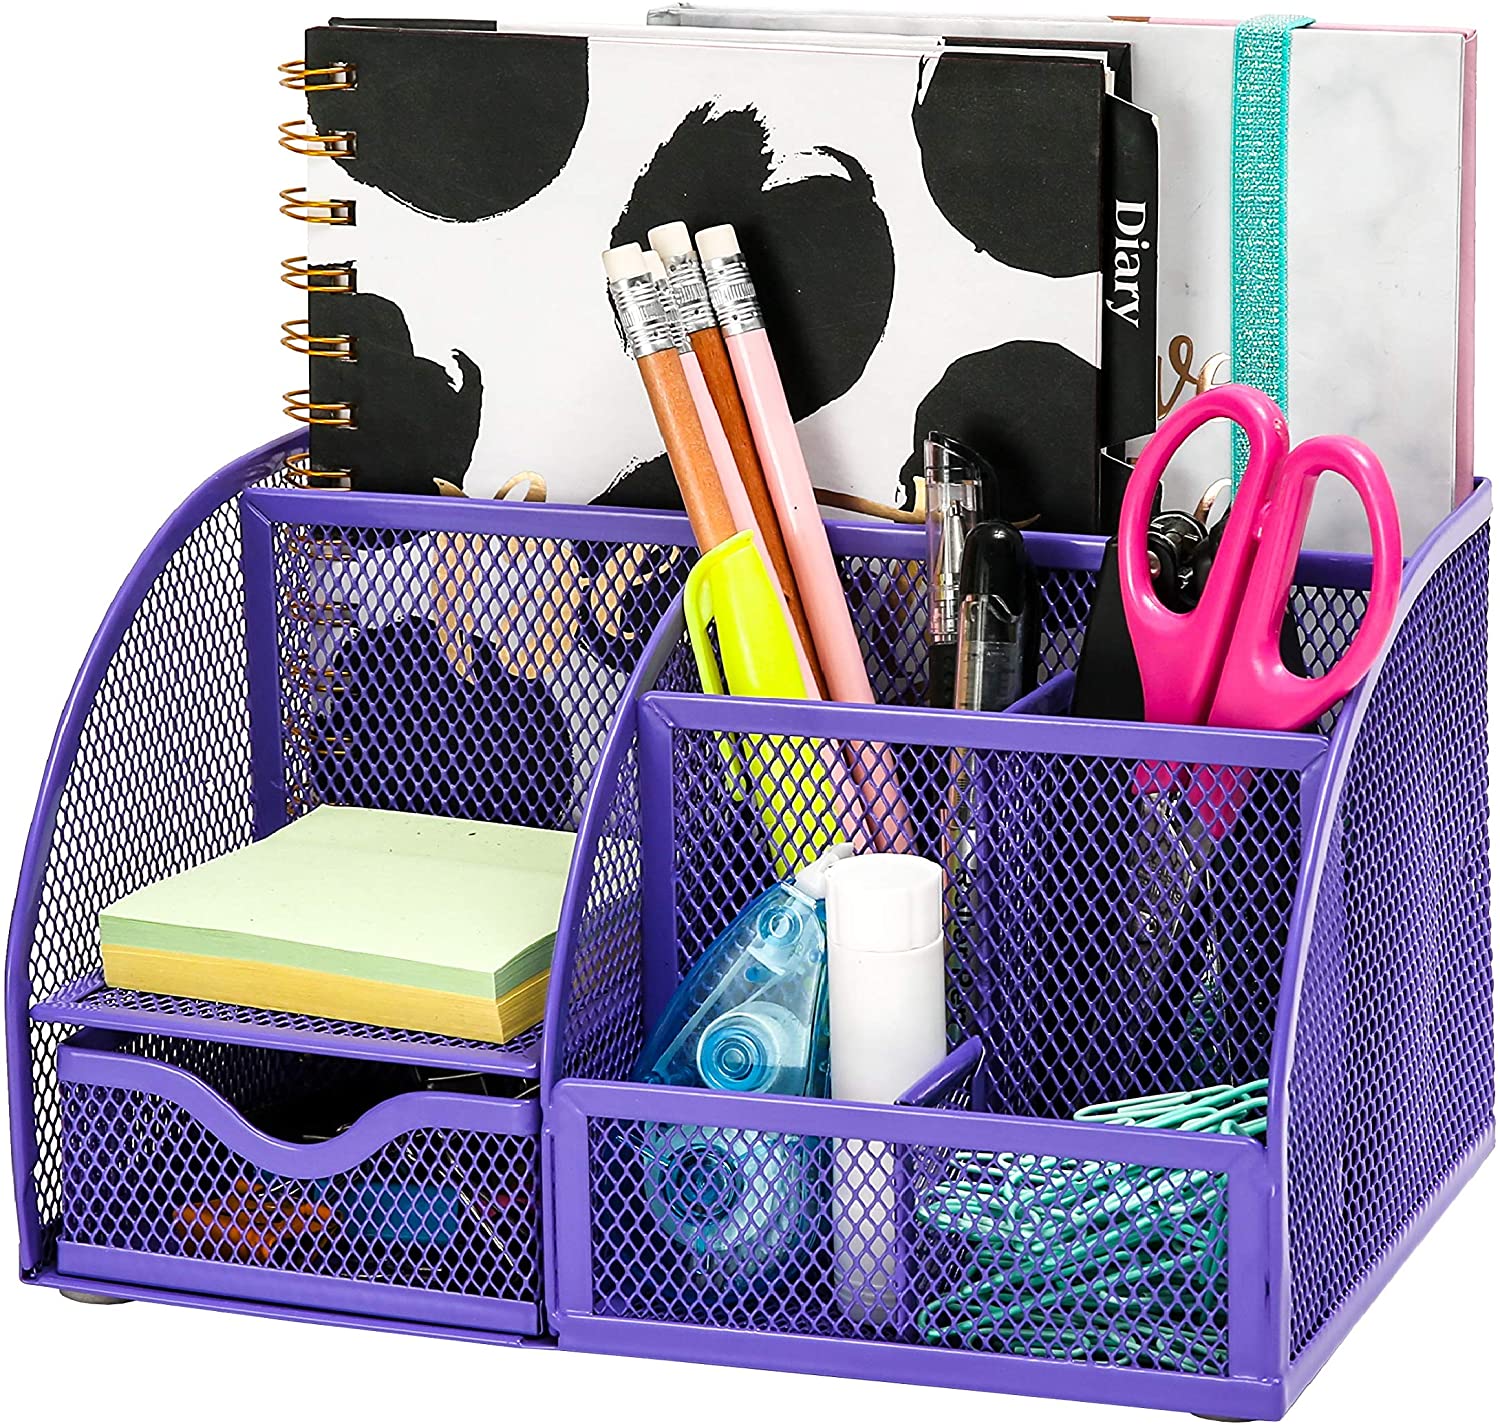 EXERZ Desk Organiser with 7 Compartments -Mesh Desk Tidy Caddy - Purple